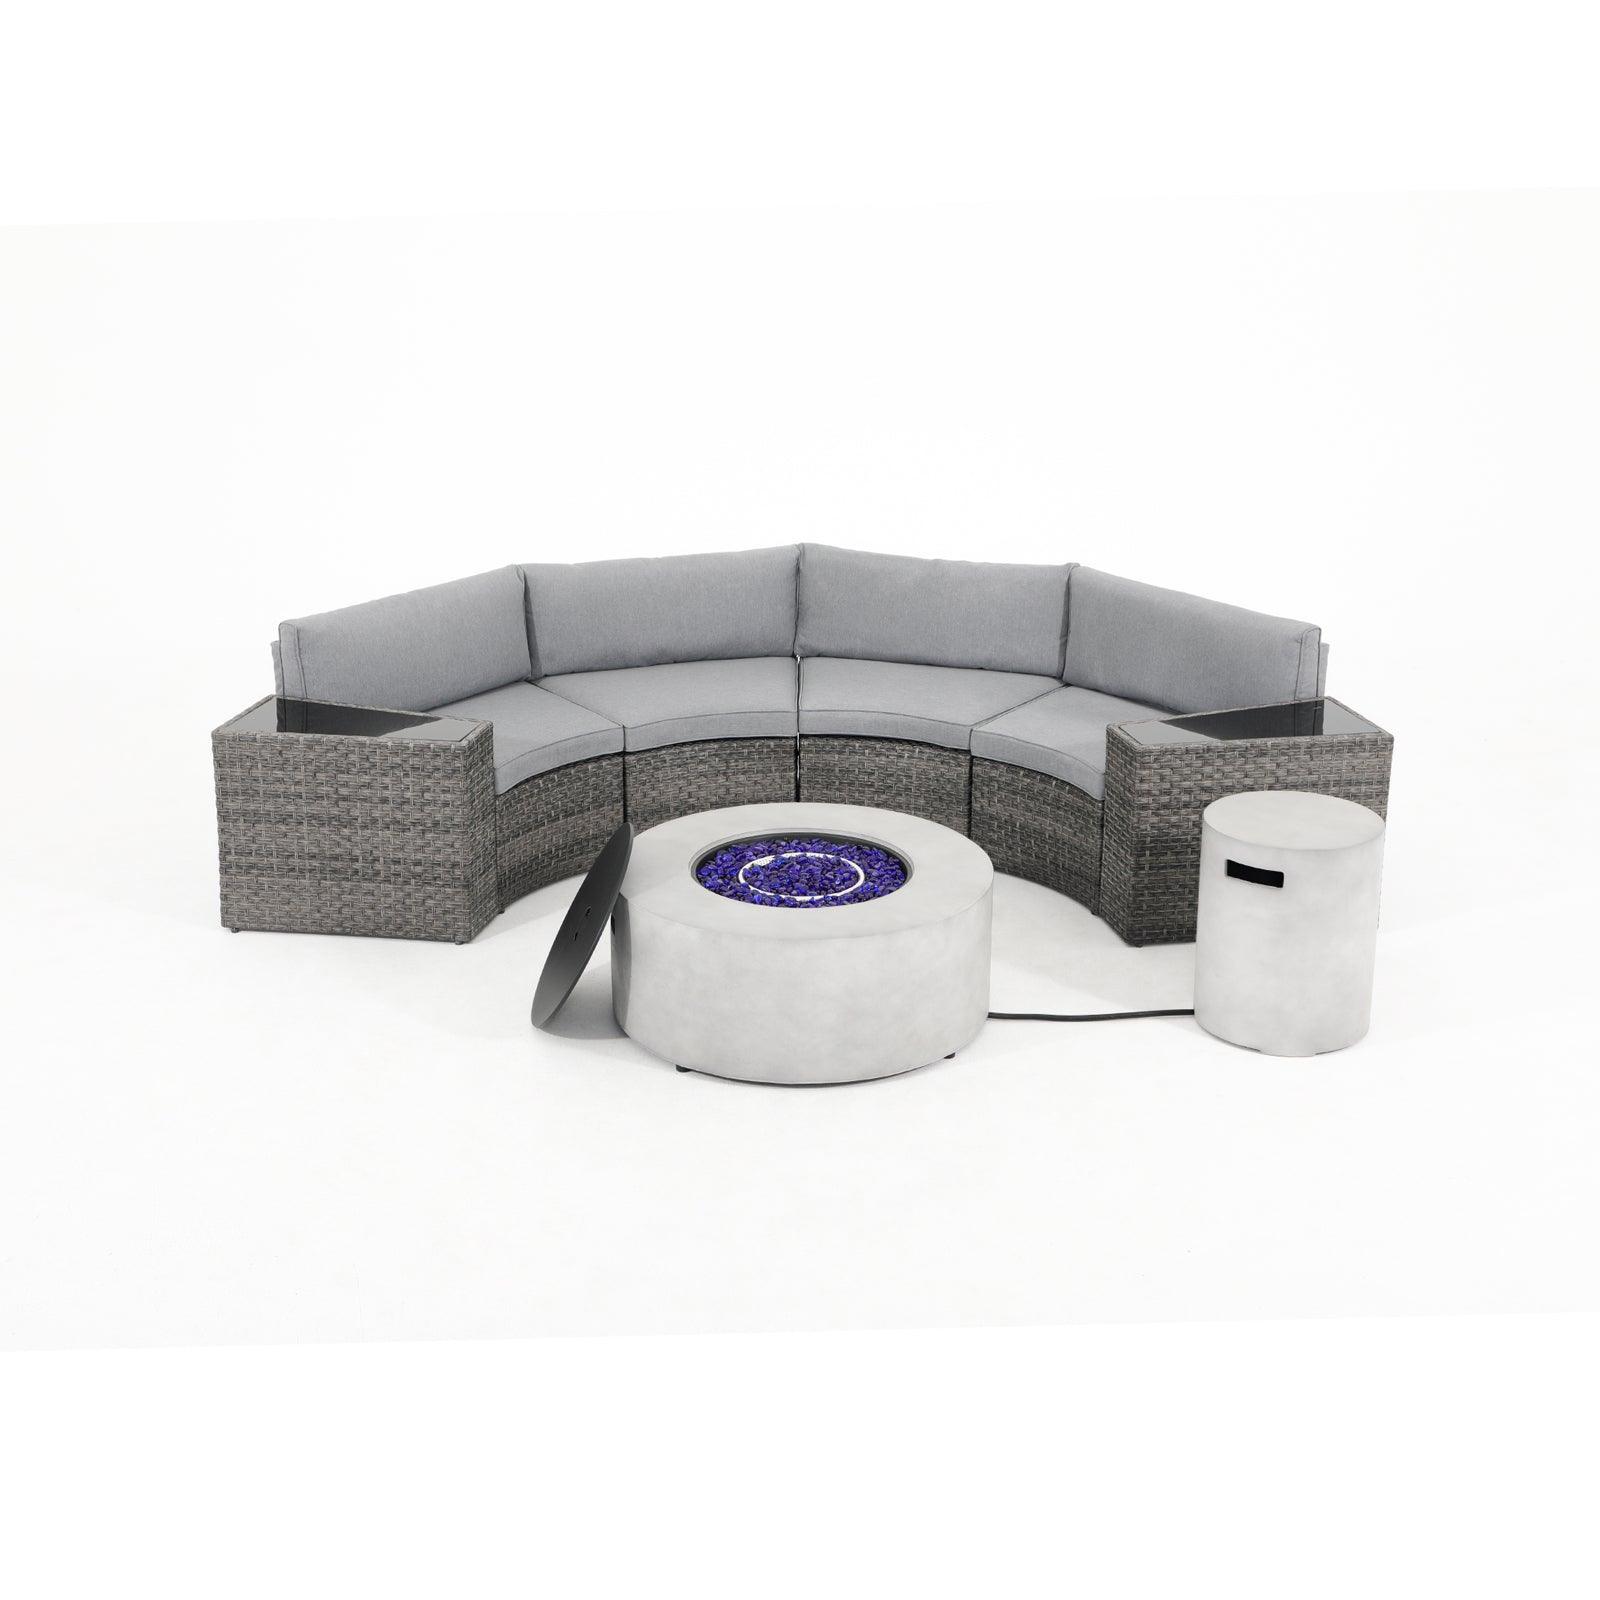 Boboli 4 seat Grey Wicker Curved Sectional sofas with grey cushions + 2 side tables + 1 grey Propane Fire Pit with tank holder and lid - Jardina Furniture #color_Grey #piece_7-pc.